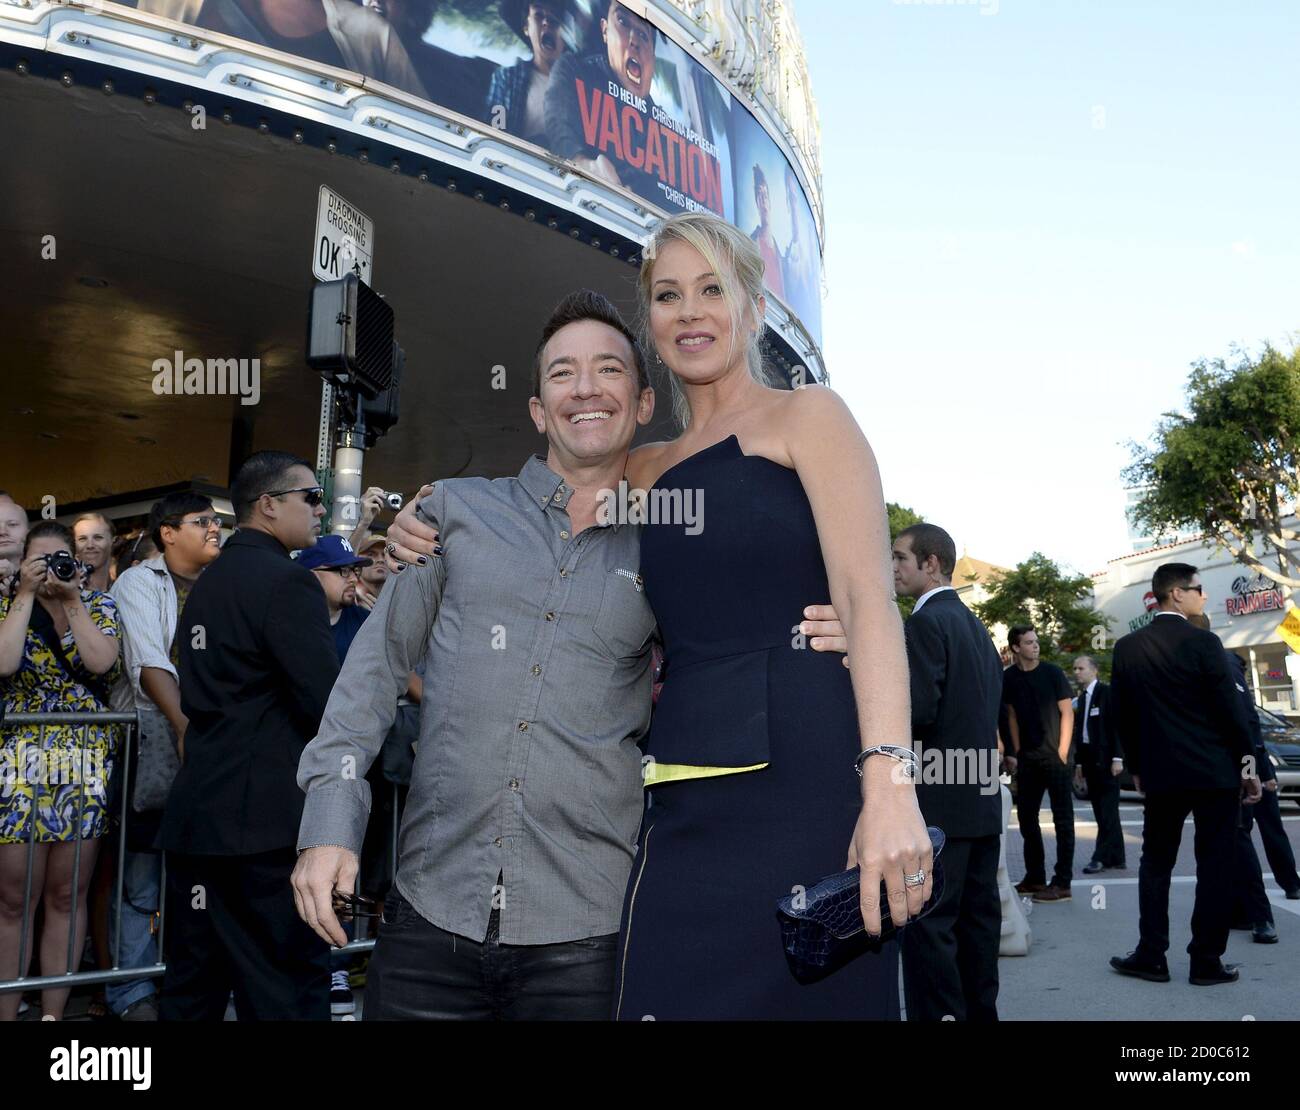 Cast member Christina Applegate poses with actor David Faustino during the premiere of the film 'Vacation' at the Regency Village Theatre in the Westwood section of Los Angeles, California July 27, 2015. REUTERS/Kevork Djansezian Stock Photo